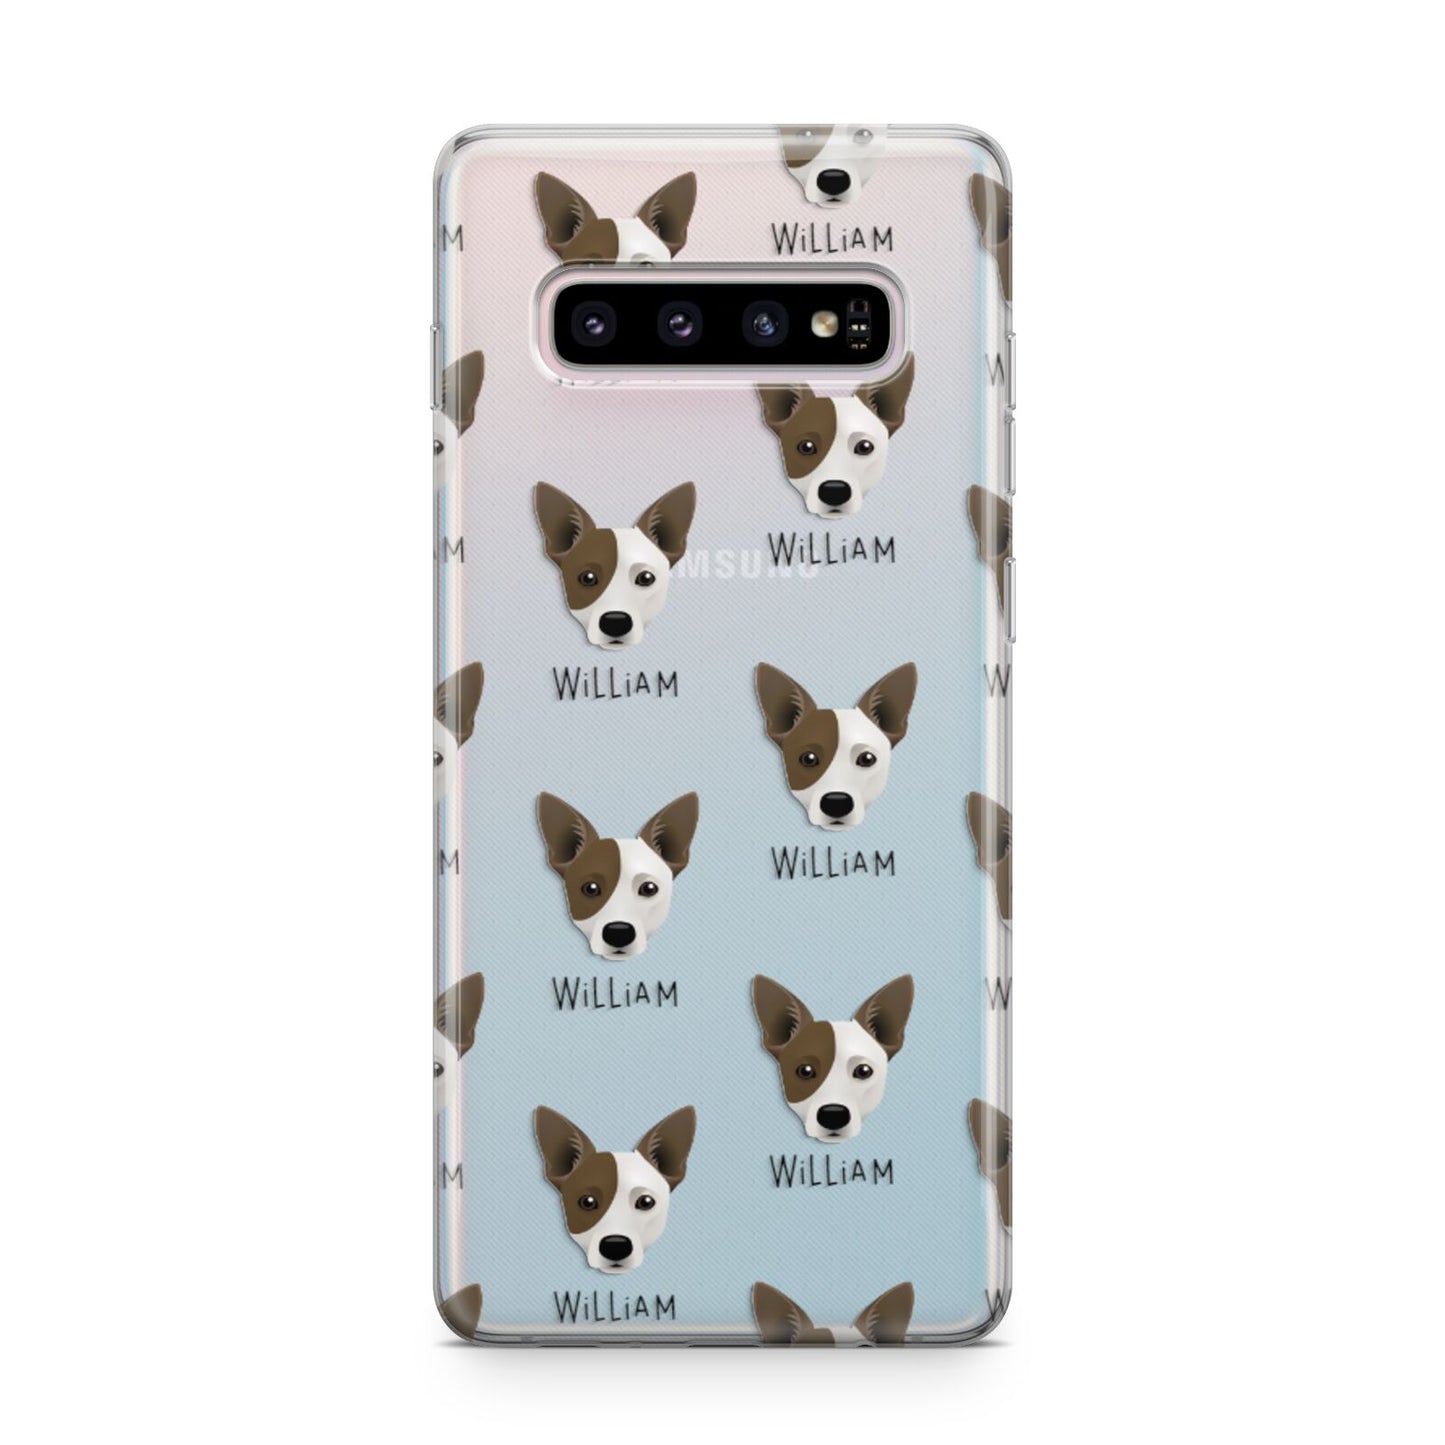 Cojack Icon with Name Samsung Galaxy S10 Plus Case